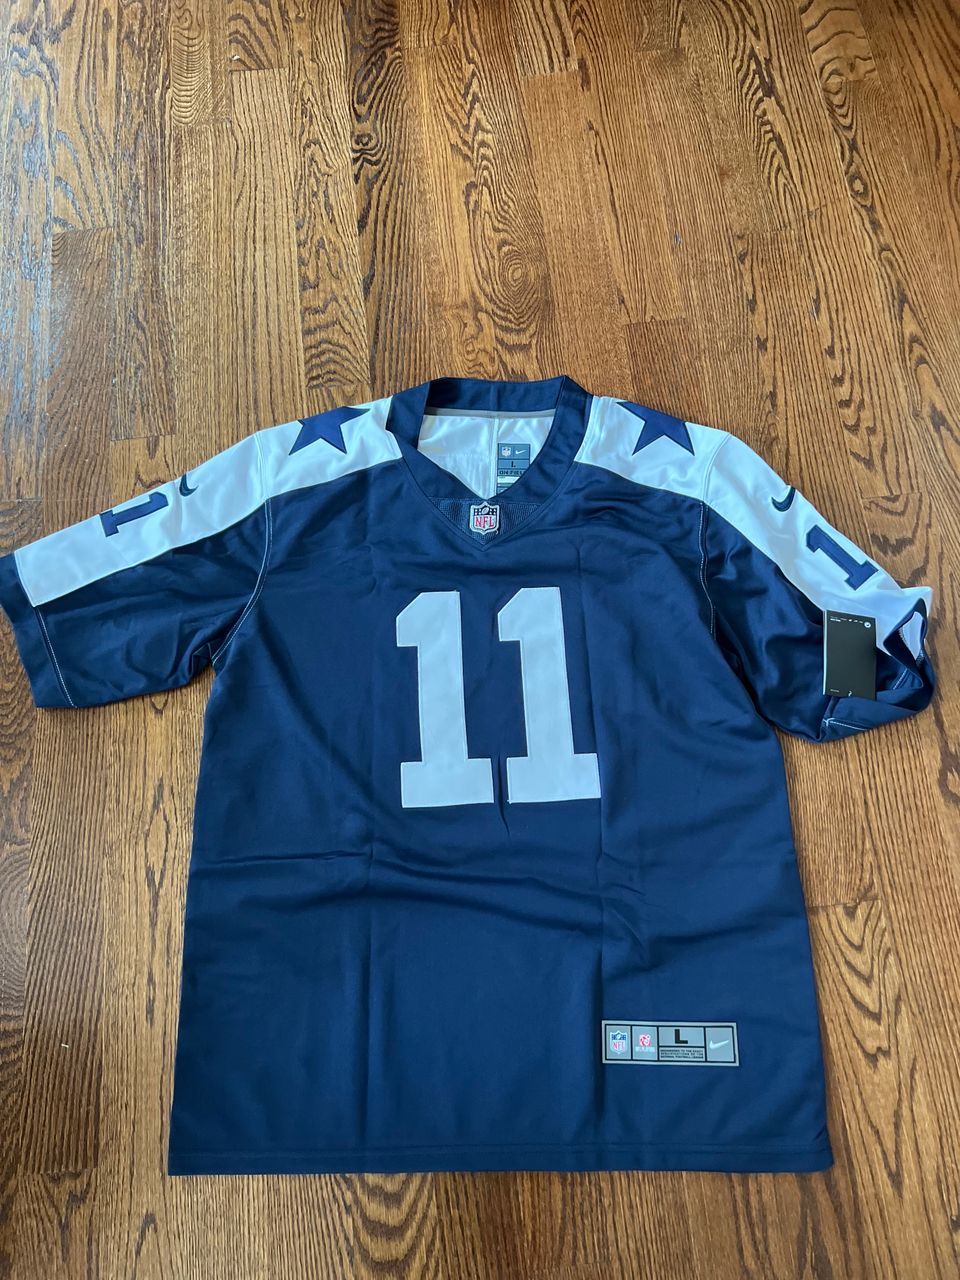 Micah parsons signed jersey front cowboys